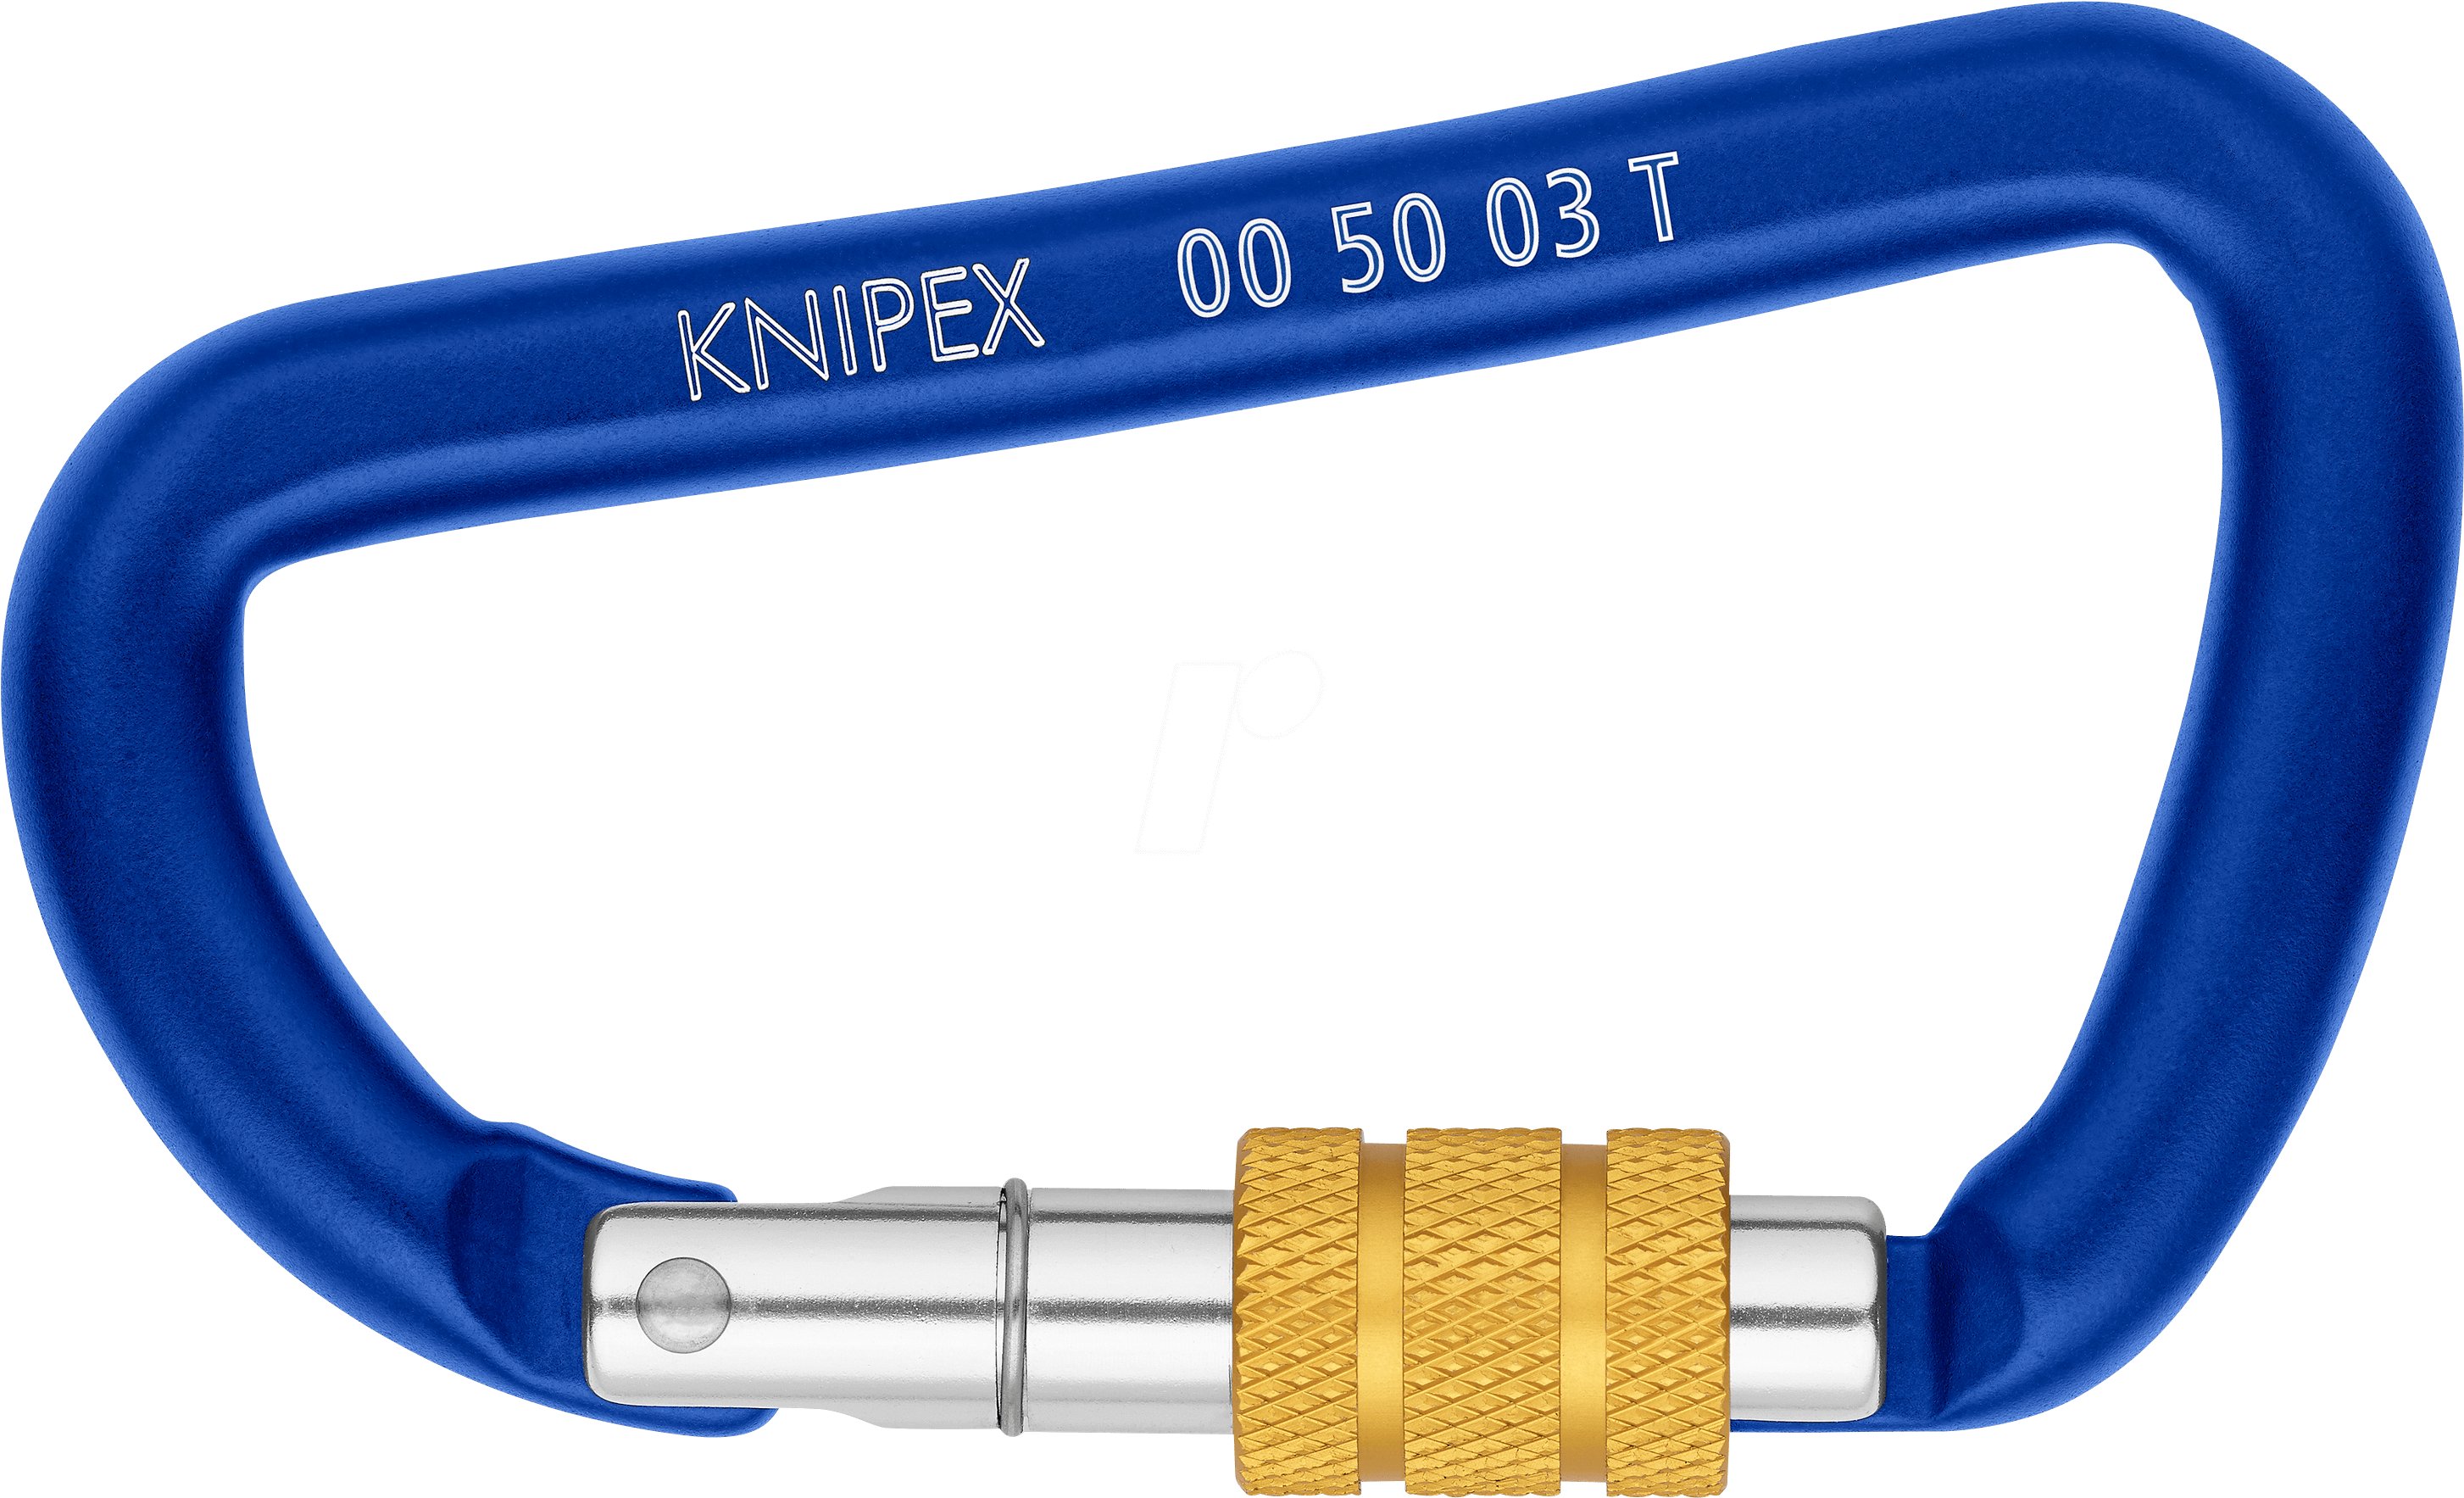 Carabiner Knipex 00 50 03 T Bk - 00 50 03 T Bk Knipex (2953x1813), Png Download